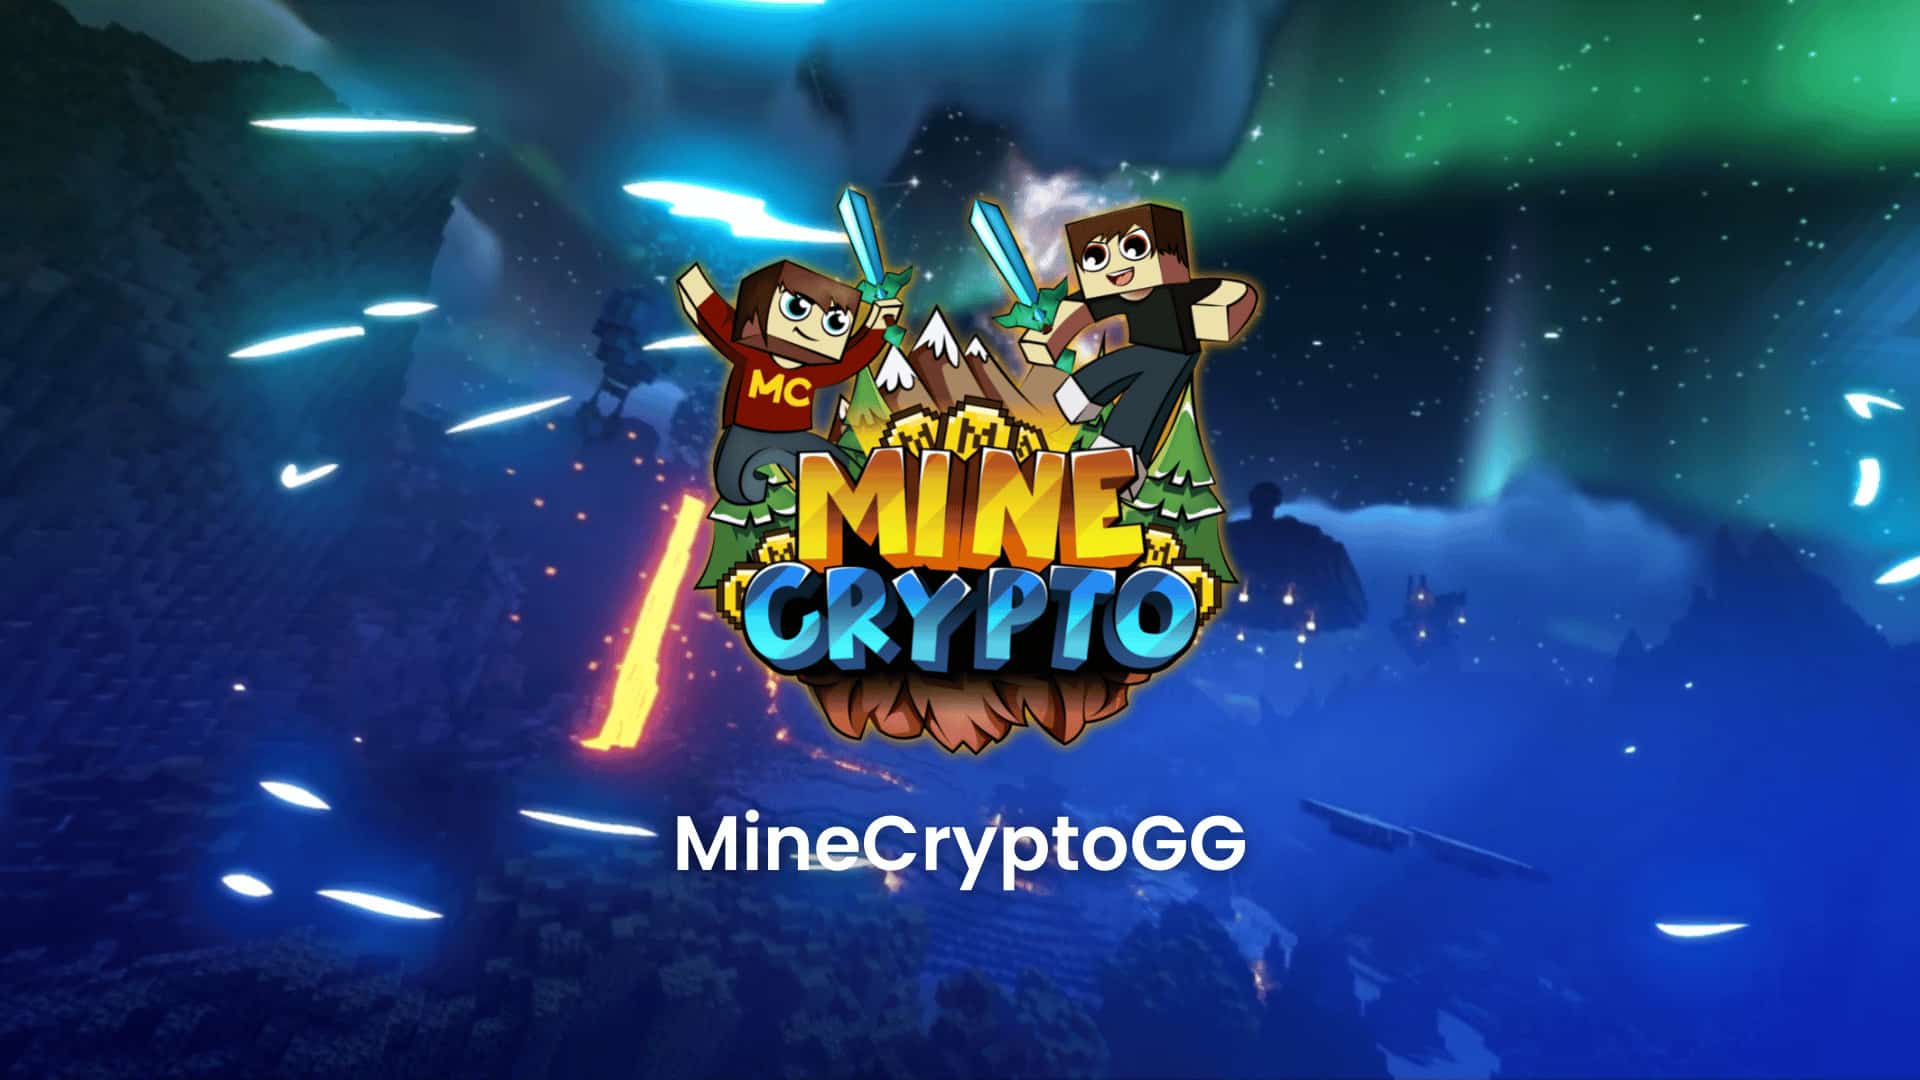 minecrypto spielworks bnbchain Spielworks, a leading blockchain startup specializing in gaming and decentralized finance (DeFi) solutions, has announced a partnership with a top P2E Minecraft server called MineCrypto.